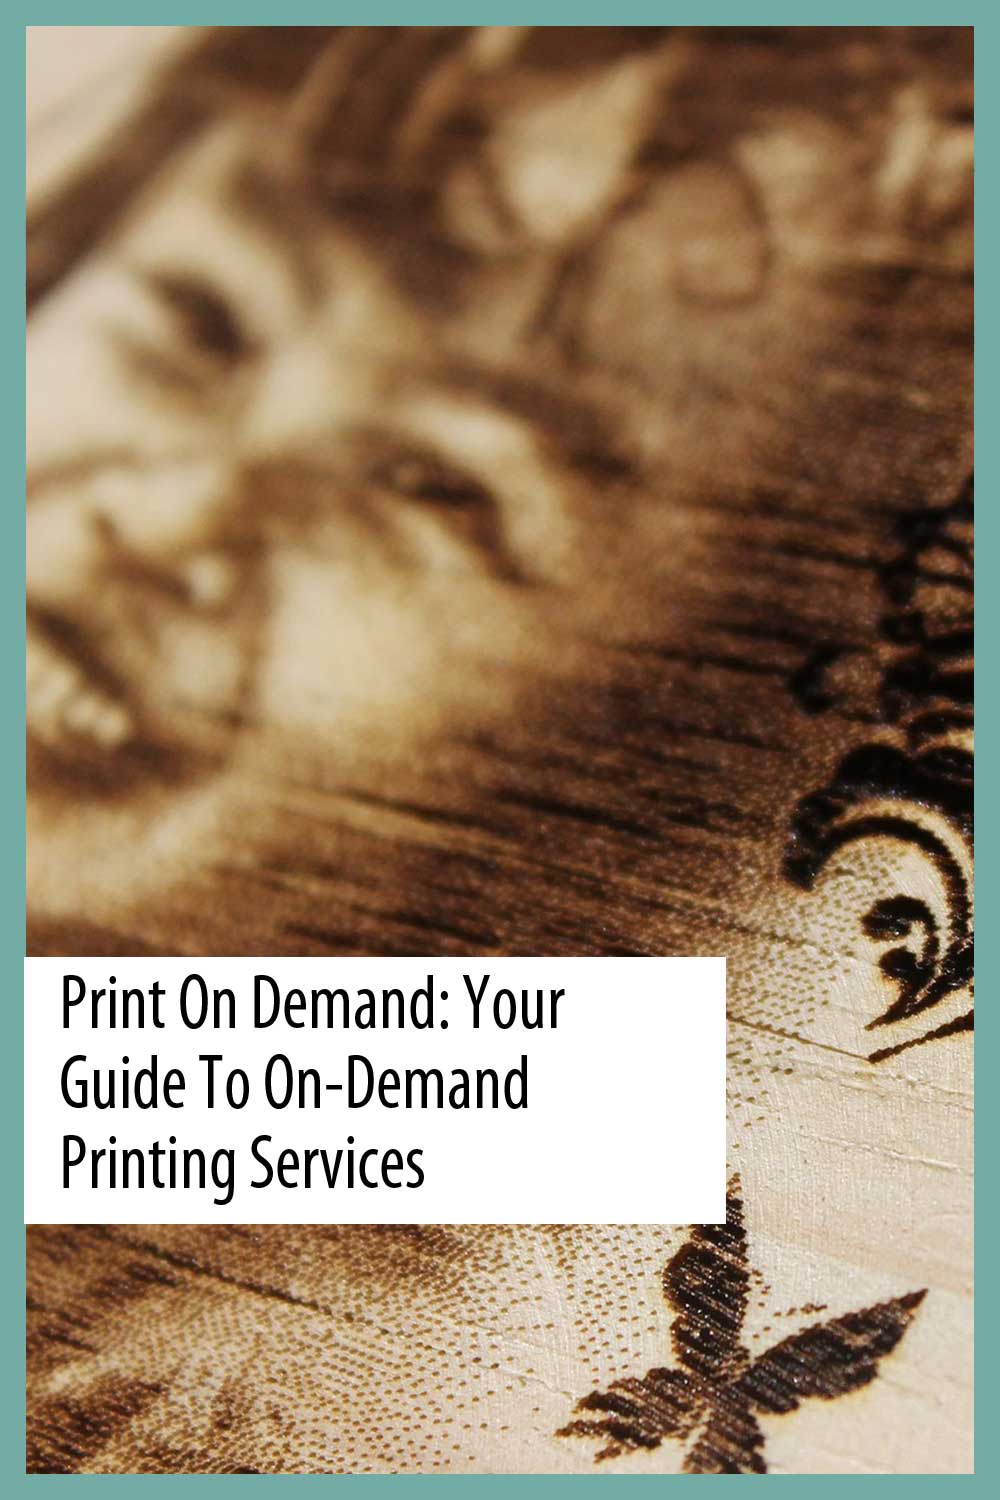 Print on Demand: Your Guide to On-Demand Printing Services